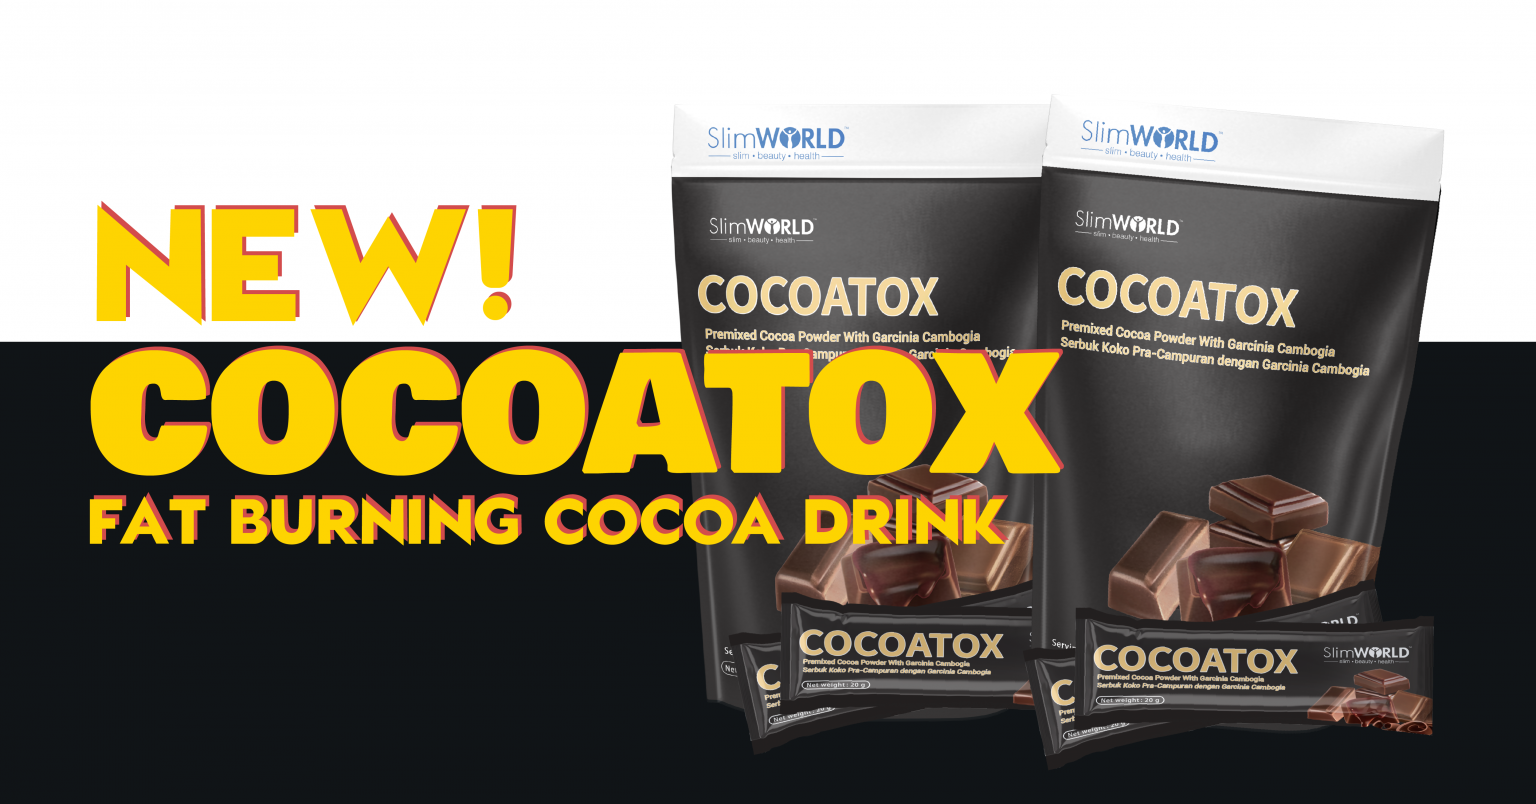 NEW! CocoaTox Fat Burning Cocoa Drink